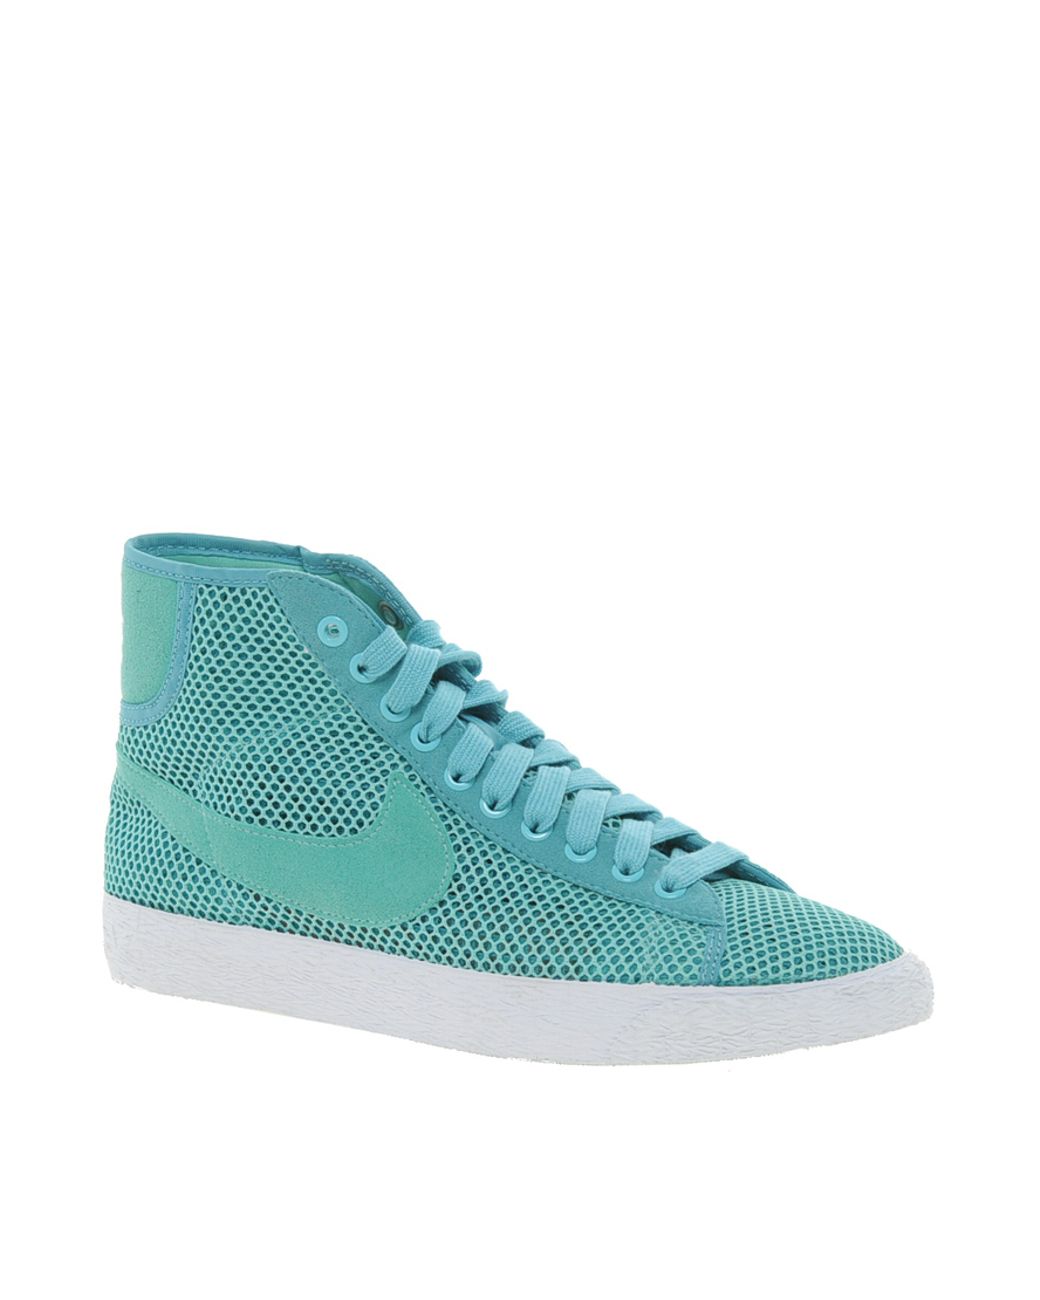 Nike Blazer Mid Mesh Turquoise High Top Trainers in Blue for Men | Lyst